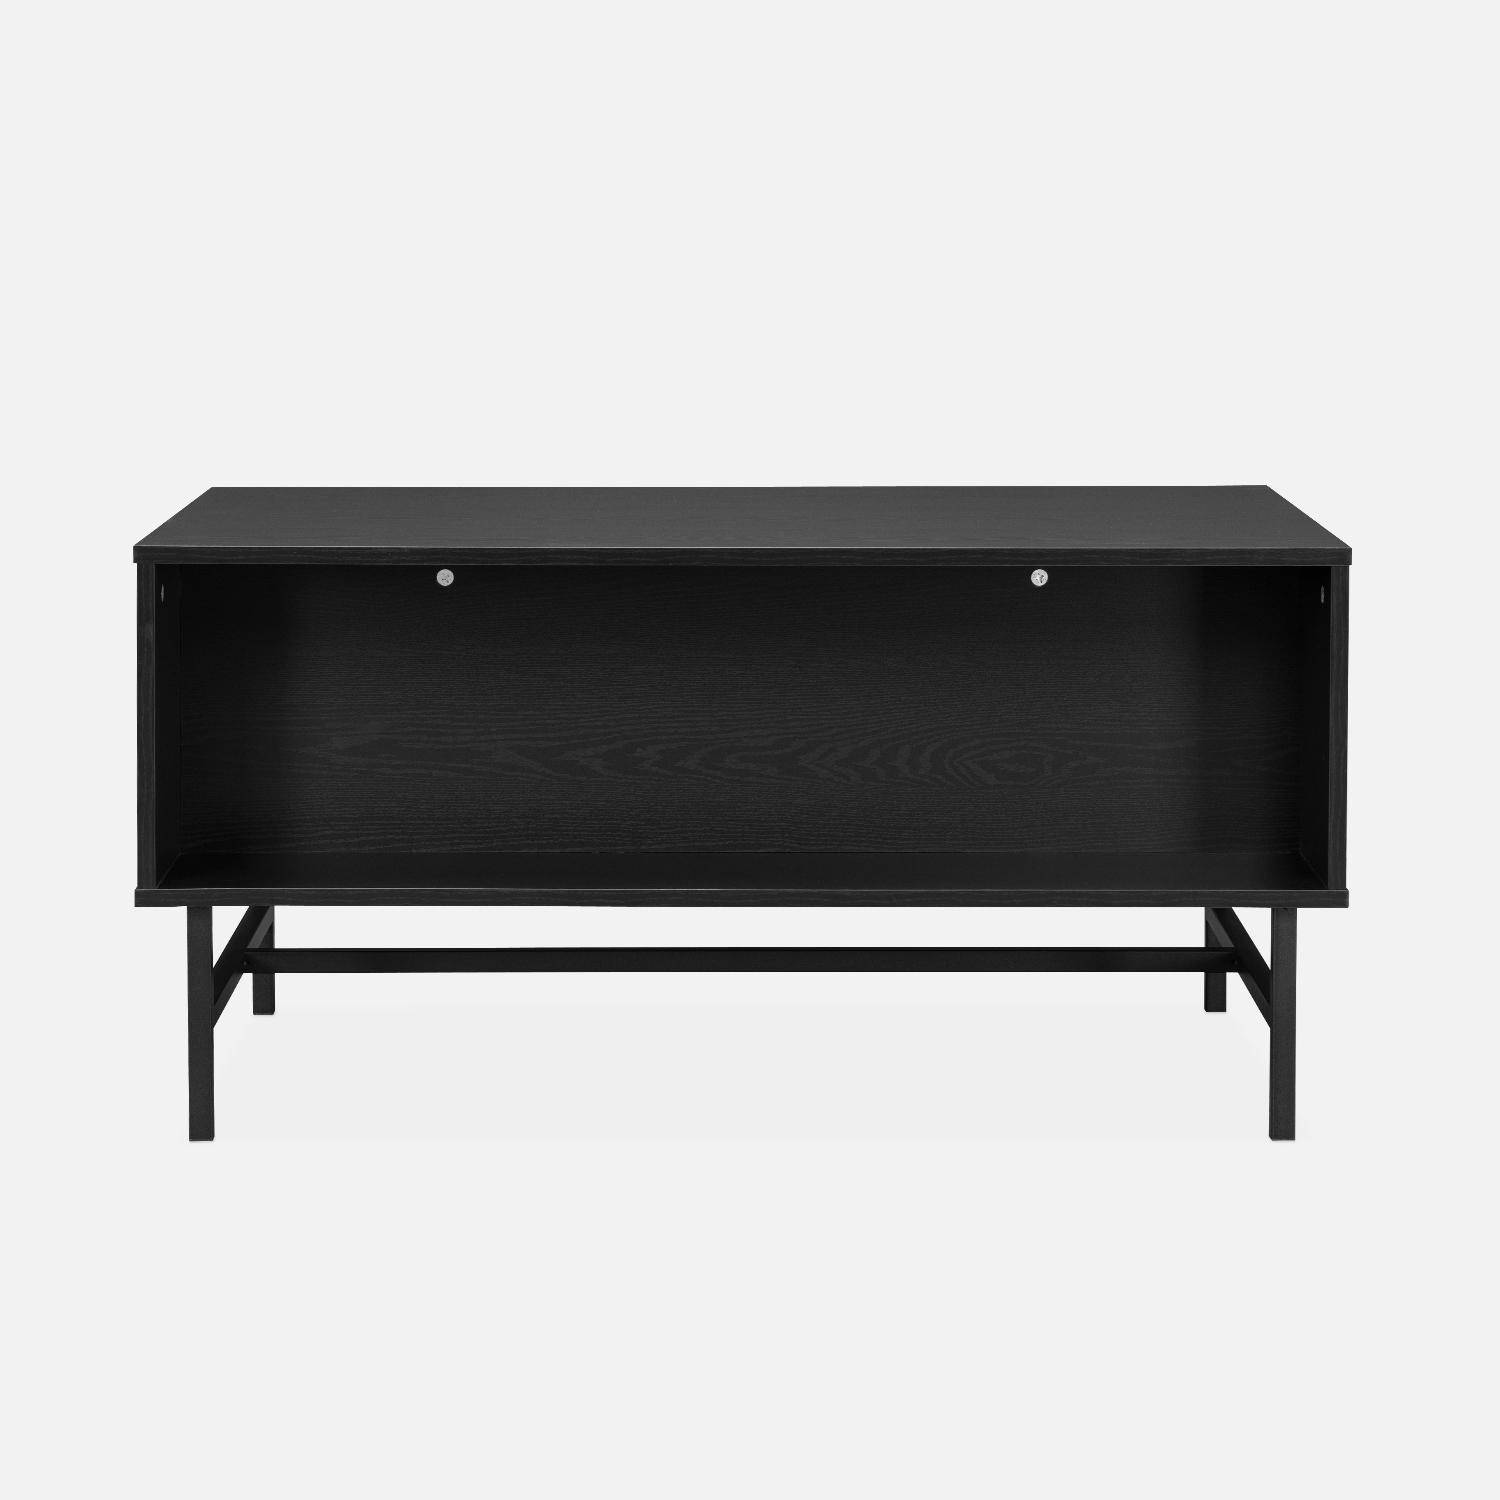 Coffee table with one drawer and one storage nook, ridged effect, industrial style, 100x59x50.2cm - Bazalt - Black Photo6